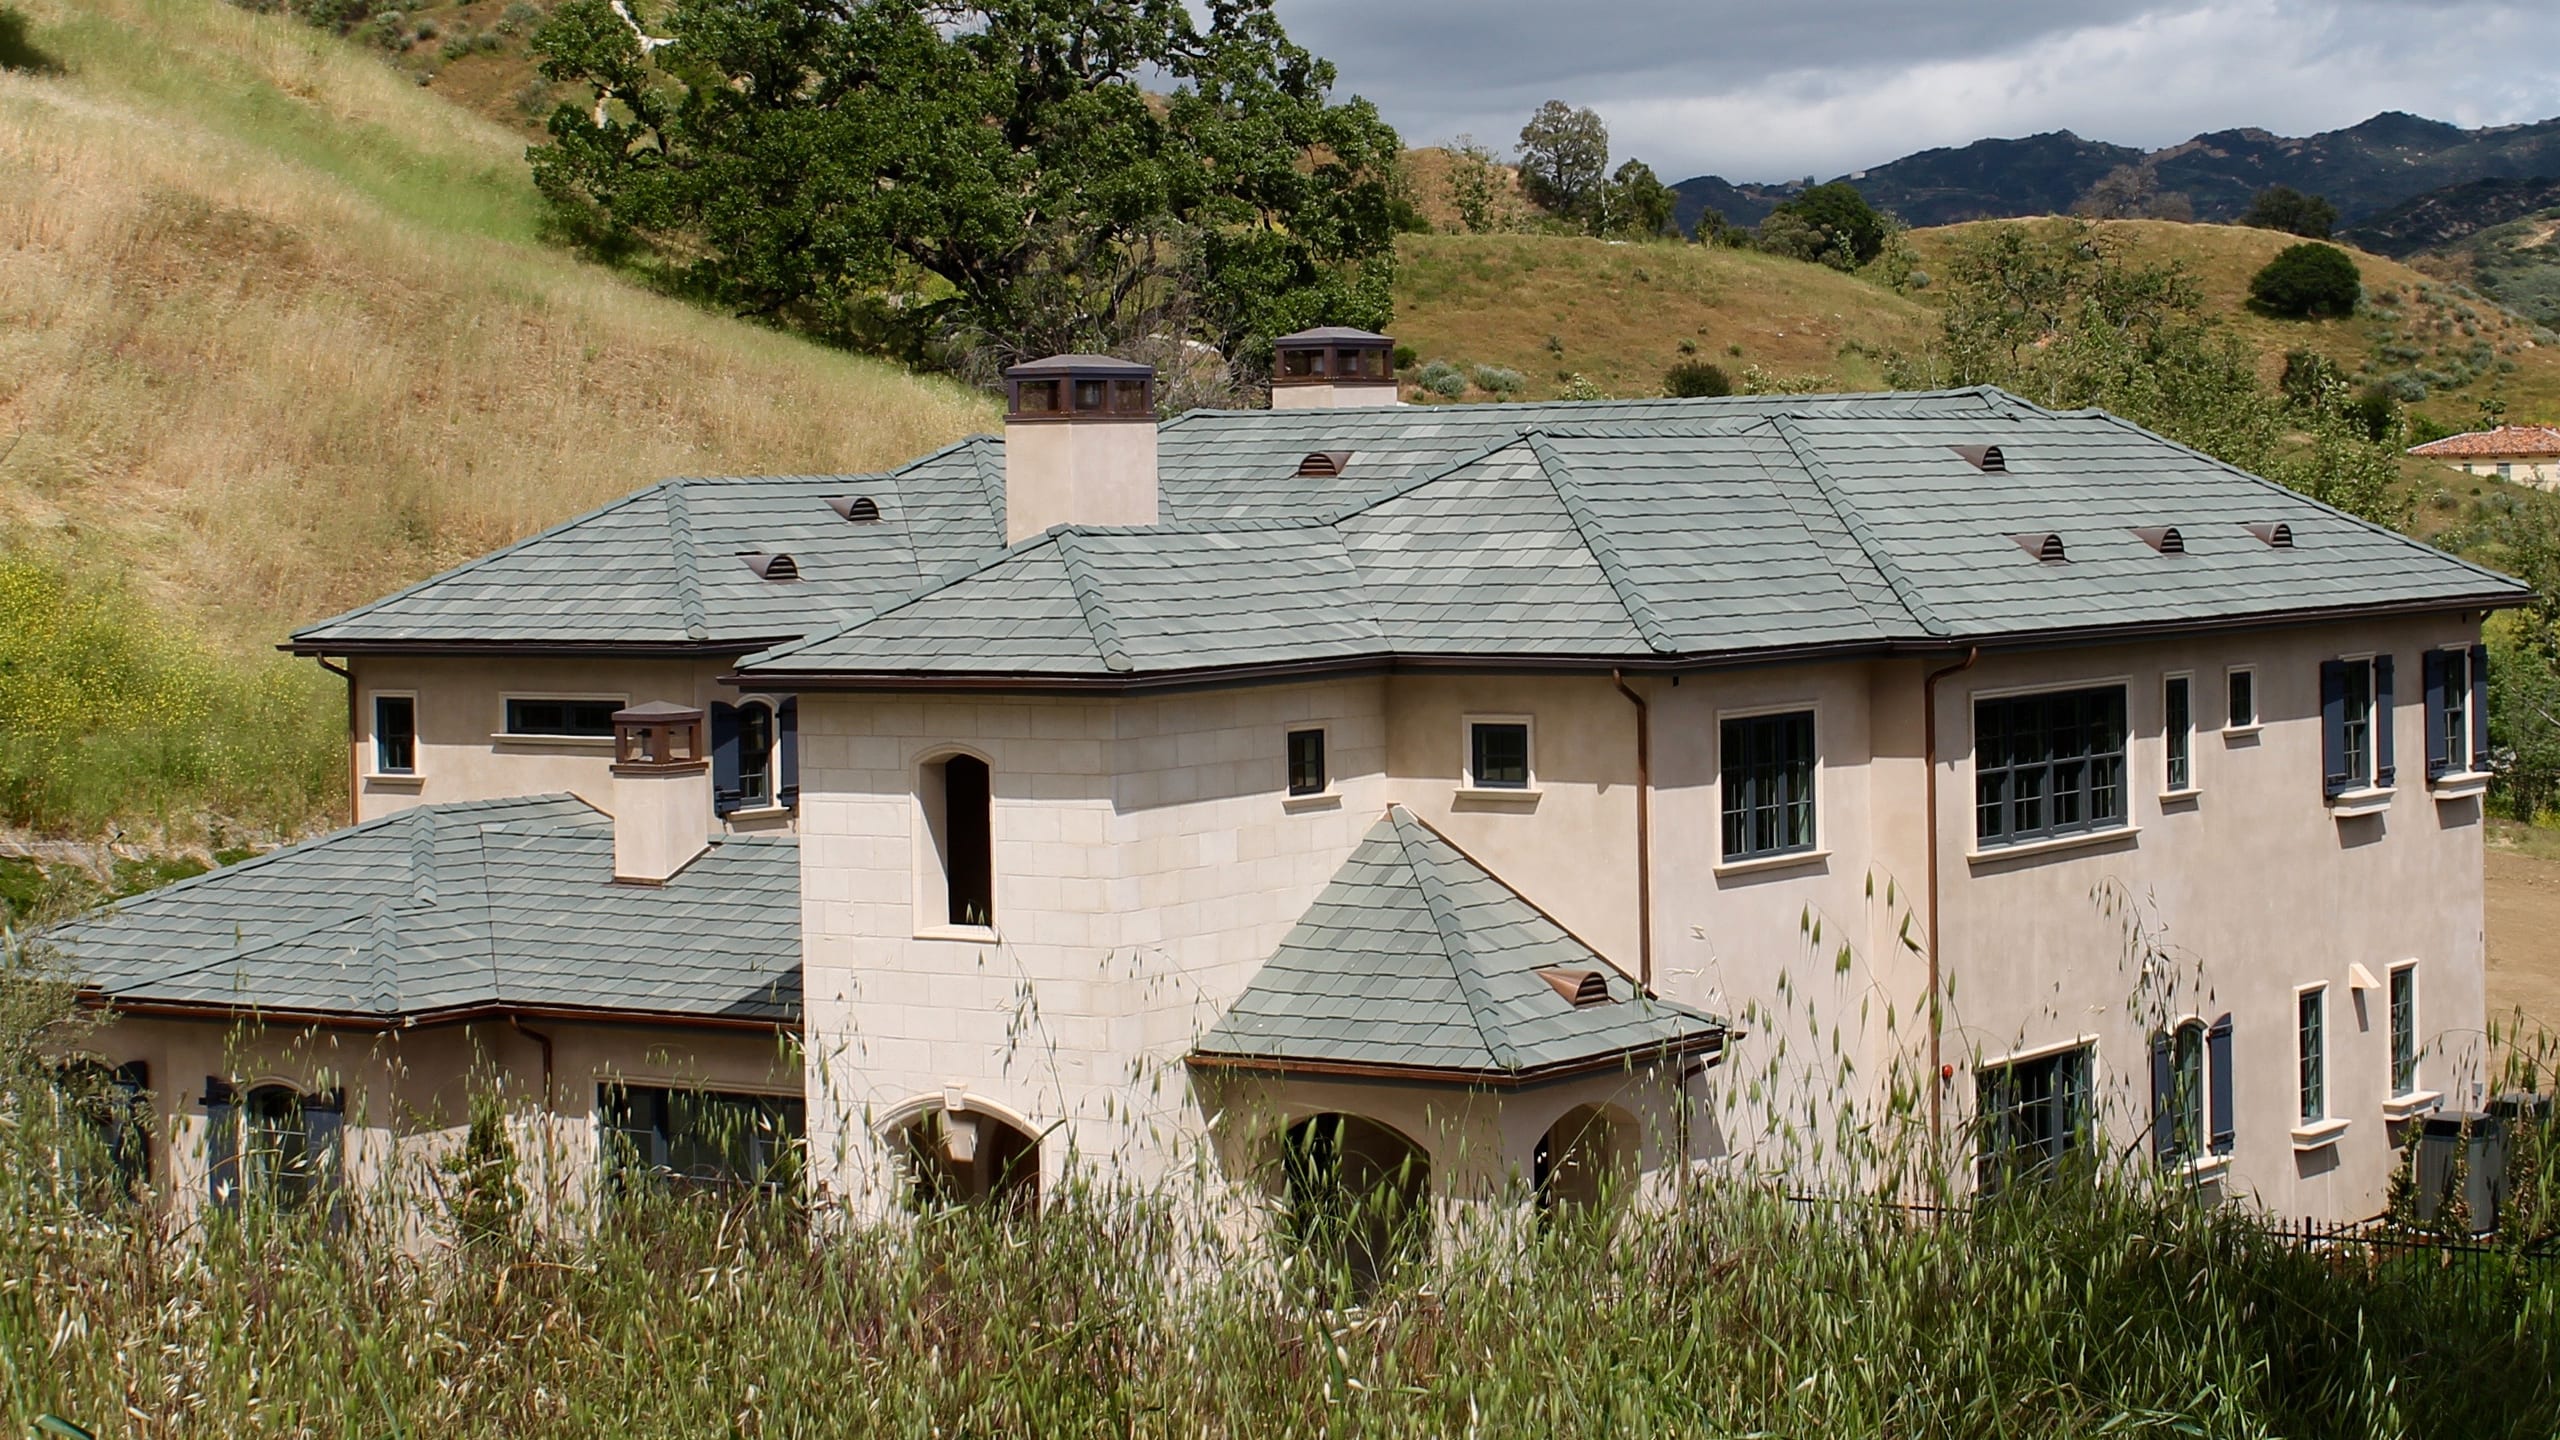 The Farms at Malibu Valley feature LudoSlate terra cotta tile from Ludowici.